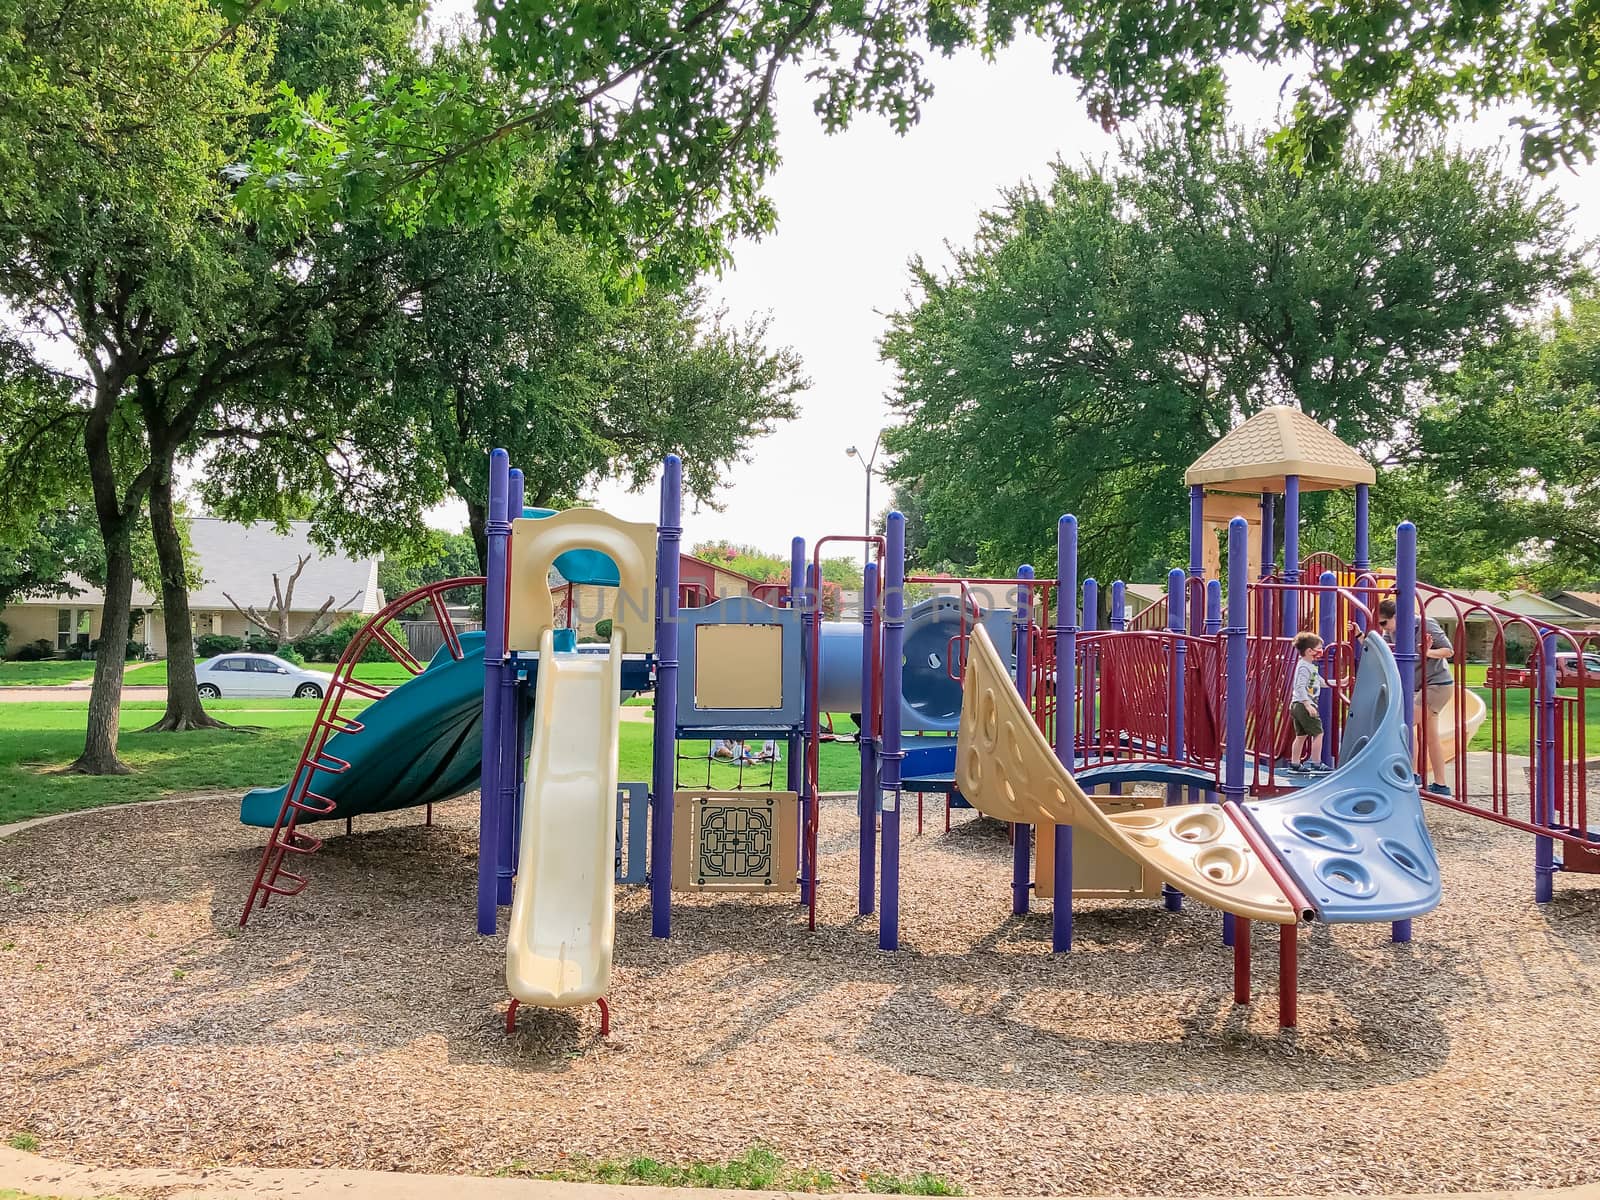 Variety of slide and swing at Colorful playground near residential neighborhood in Richardson, Texas, USA by trongnguyen